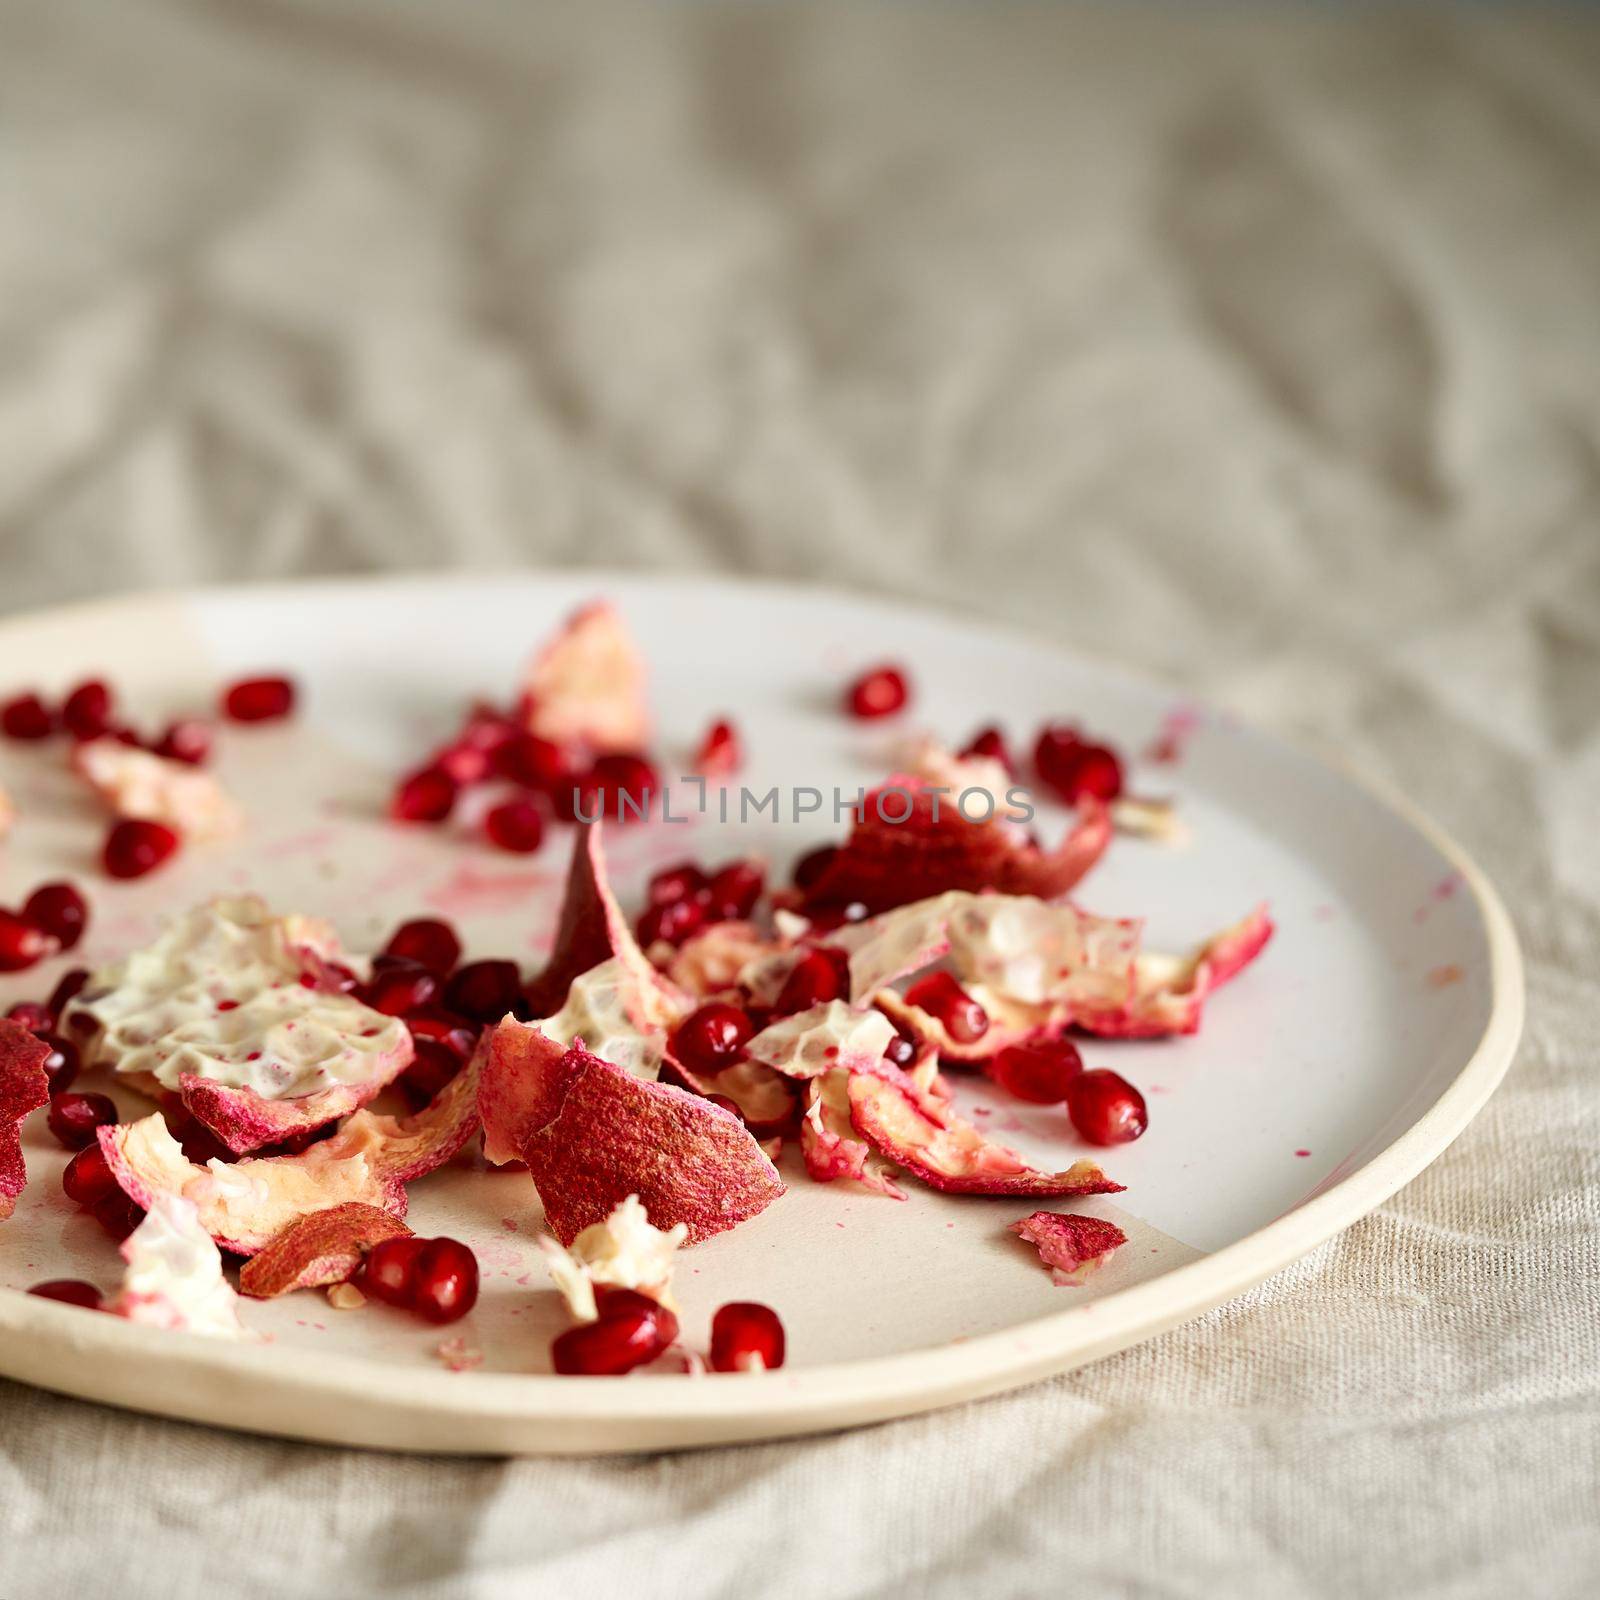 food waste of pomegranate cleaning and seeds on plate on table covered with crumpled beige tablecloth in natural light from window. Lifestyle photo